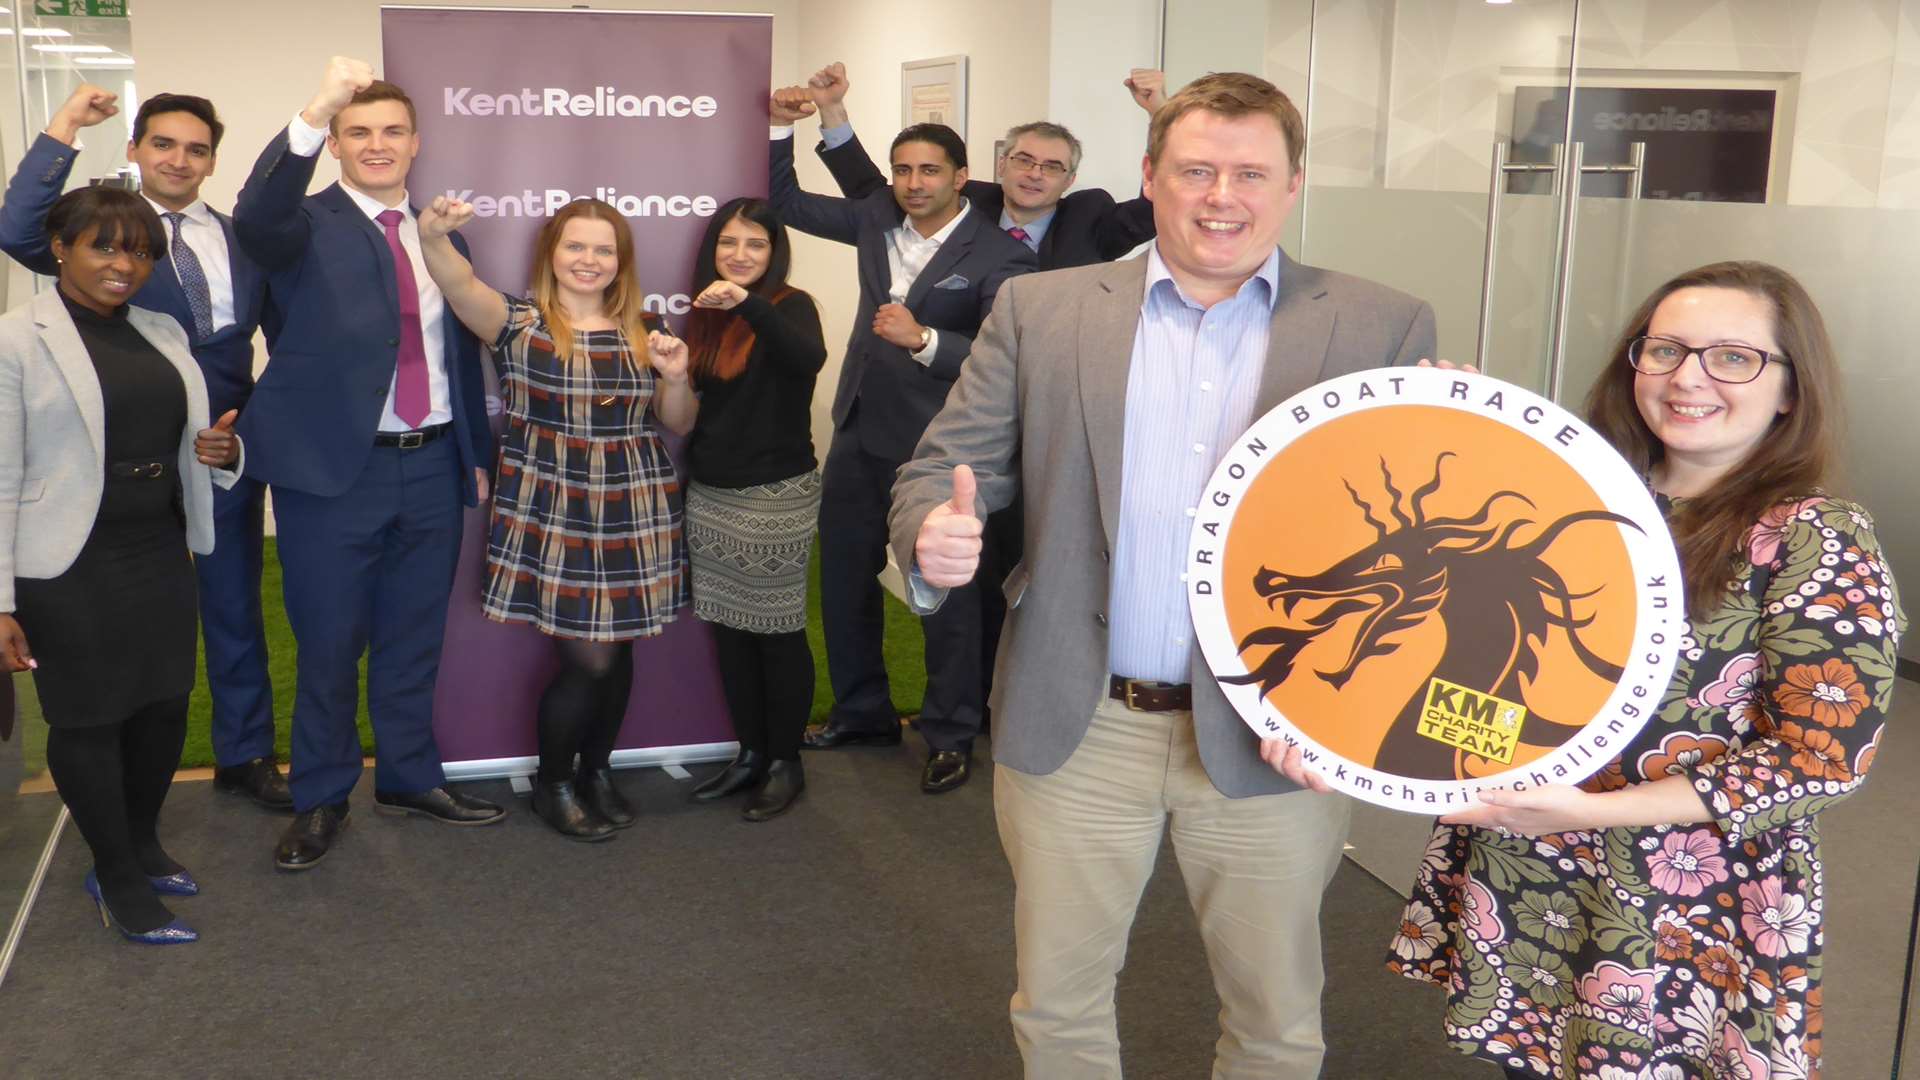 Robert Gurr, Polly Viccars and staff at Kent Reliance announce support of the KM Dragon Boat 2016, staged at Moat Park, Maidstone on Sunday, July 3